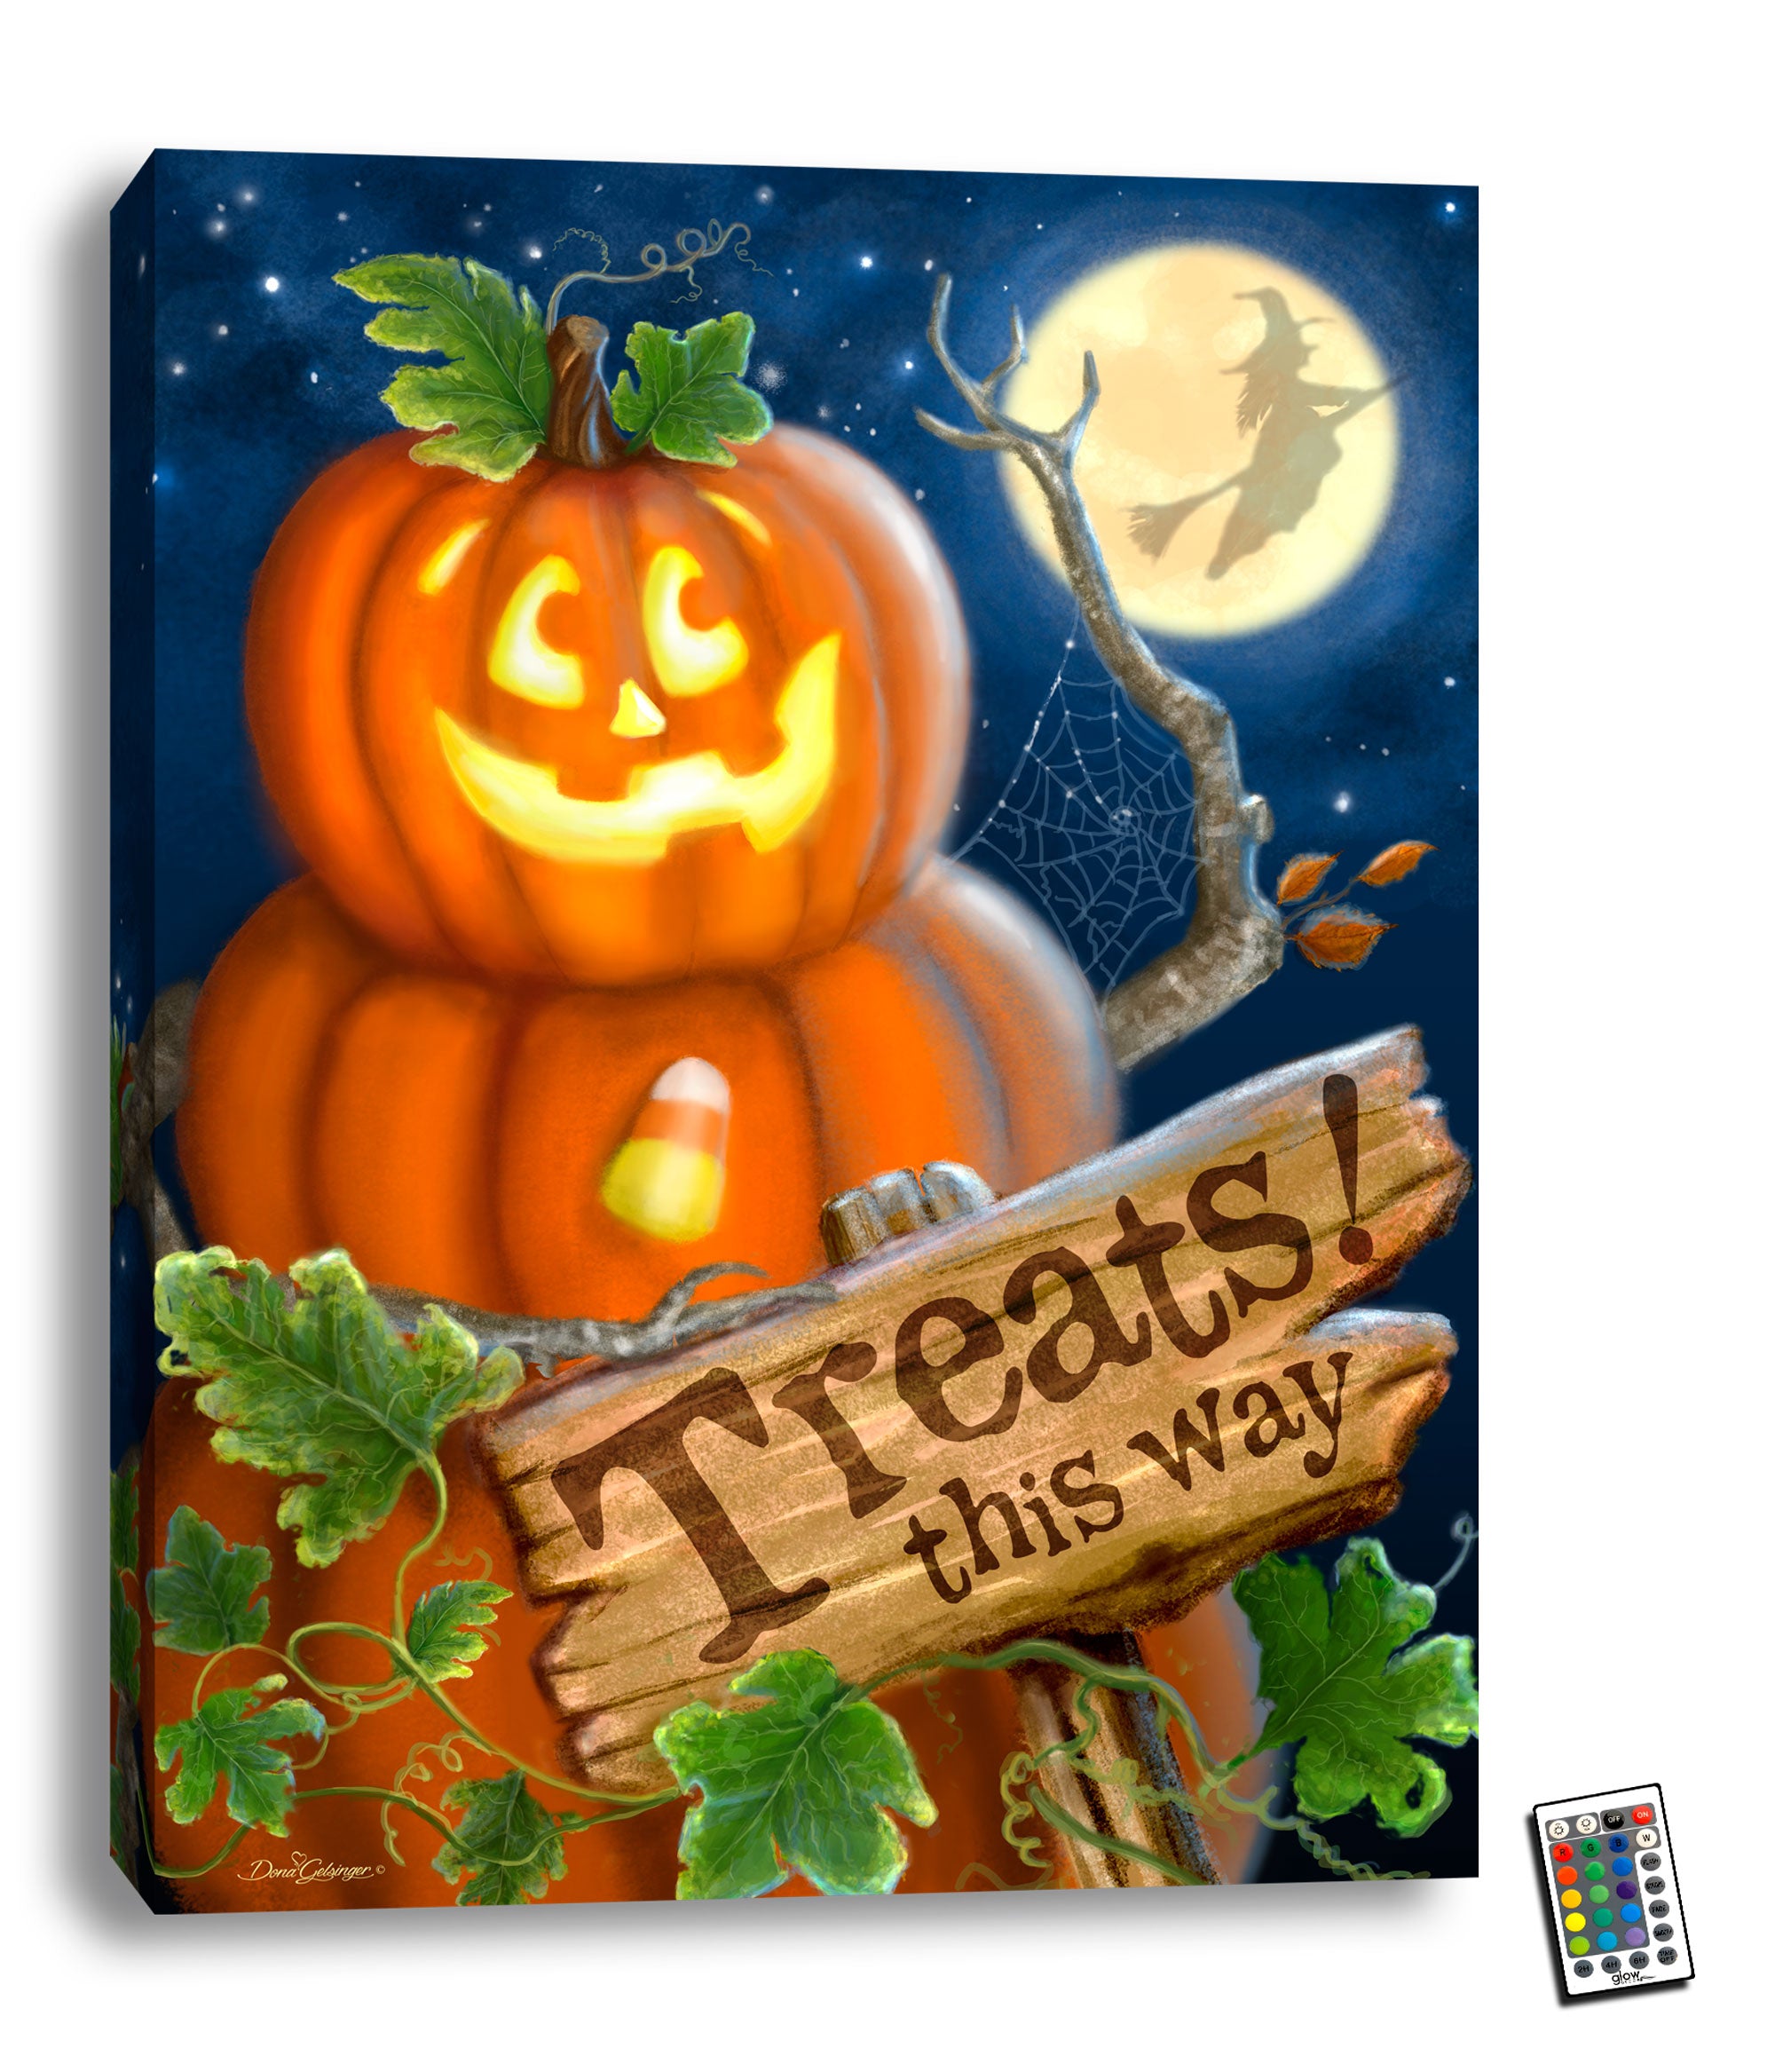 Featuring a grinning jack-o-lantern stacked on two other pumpkins like a snowman, this wall art is sure to bring a smile to your face. The sign in front of the pumpkin trio reads "treats this way!", inviting trick-or-treaters and guests to come closer and enjoy the Halloween festivities.